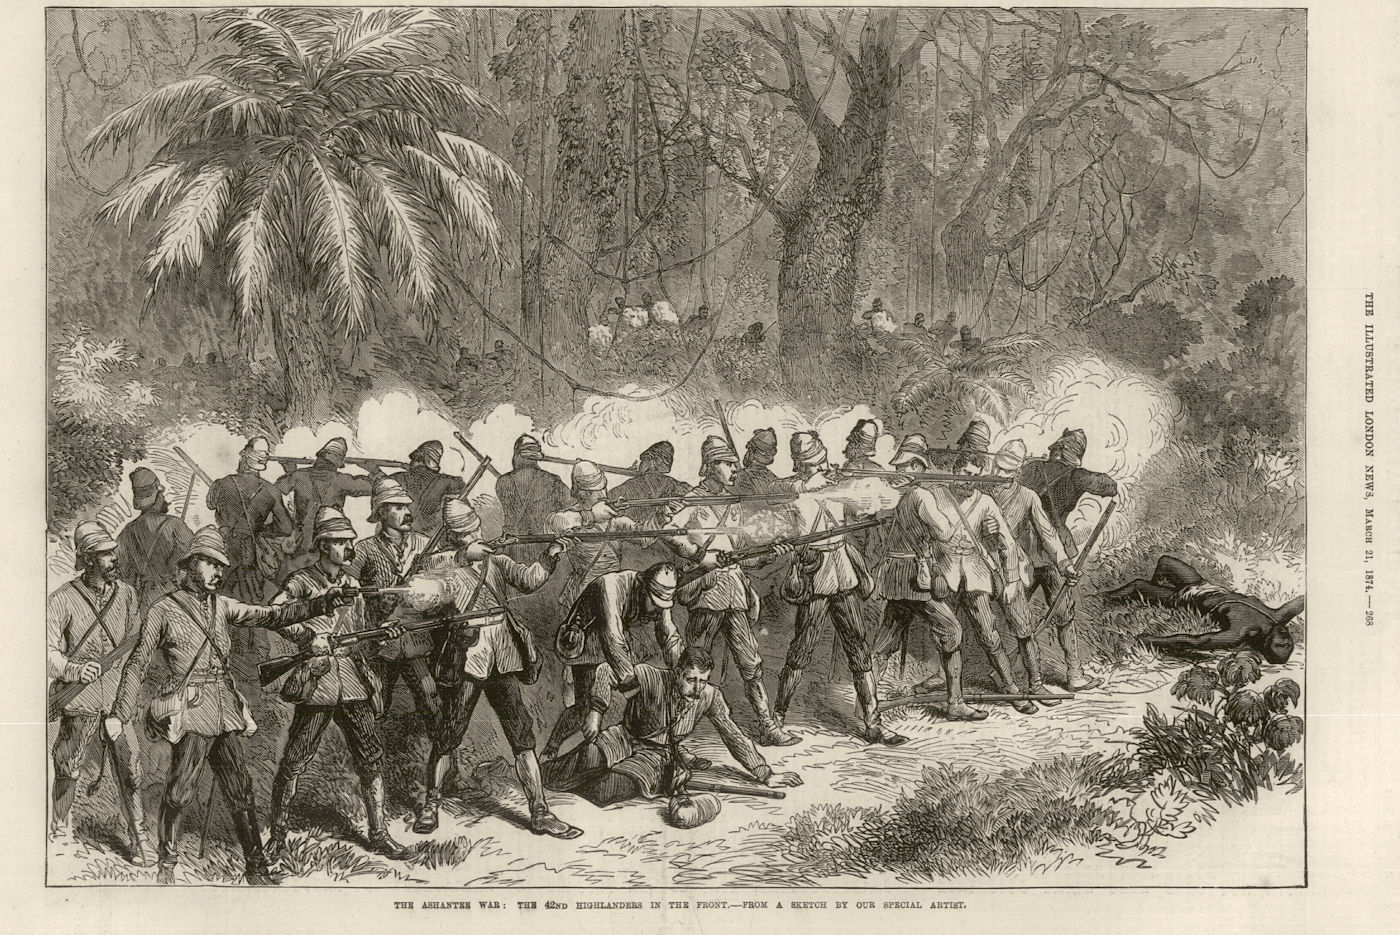 Associate Product The Third Anglo-Ashanti War: The 42nd Highlanders in the front. Ghana 1874